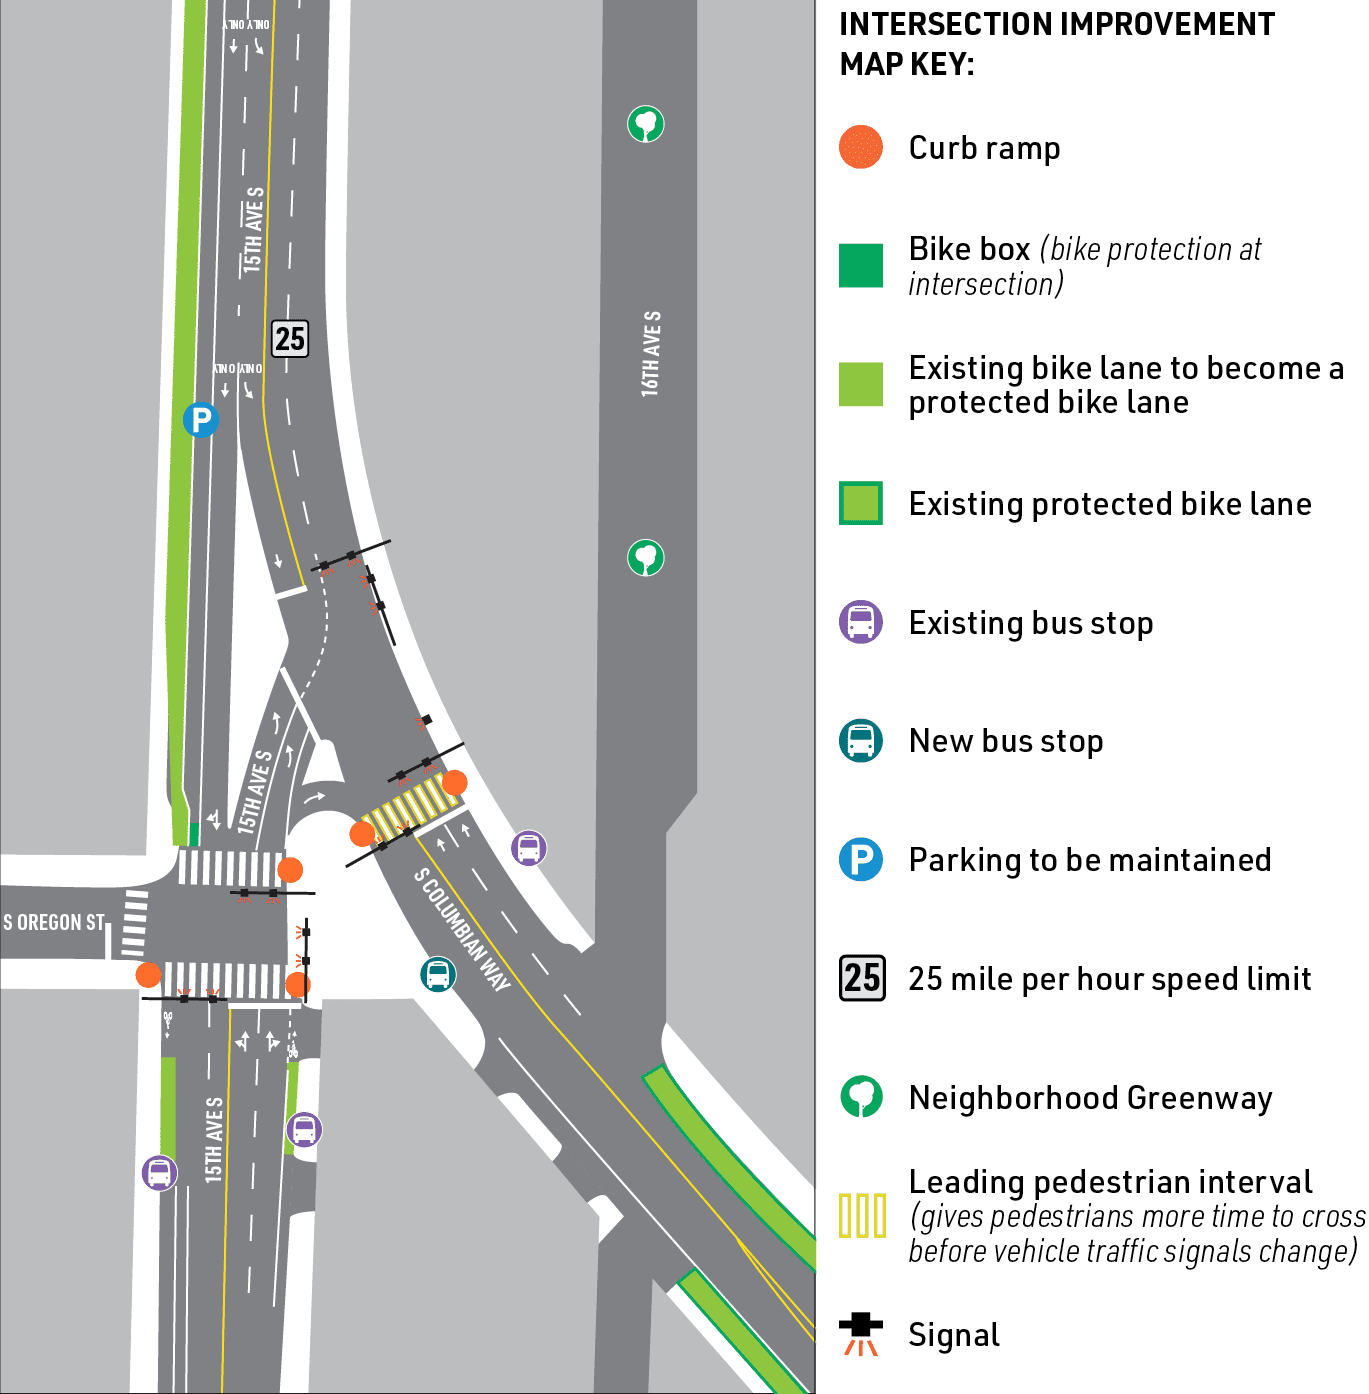 Map showing specific intersection improvements along 15th Ave S and S Columbian Way. Improvements include curb ramps, bike box, protected bike lanes, bus stops, and maintained parking area. For more information, call (206) 684-4193. 